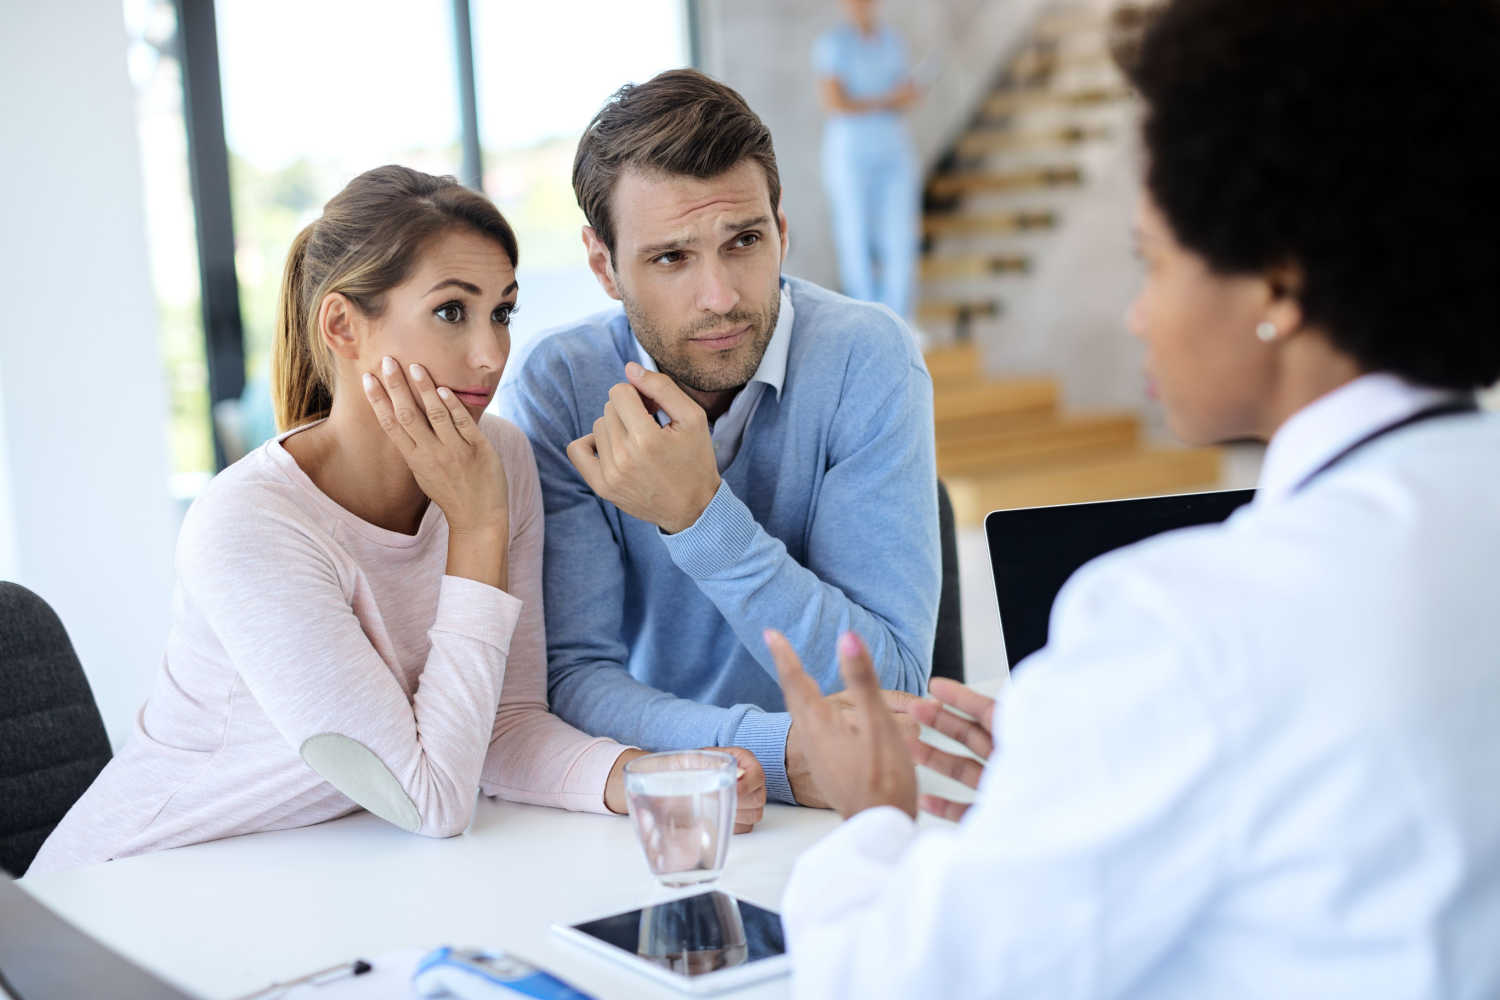 Consulting a doctor for unexplained female infertility